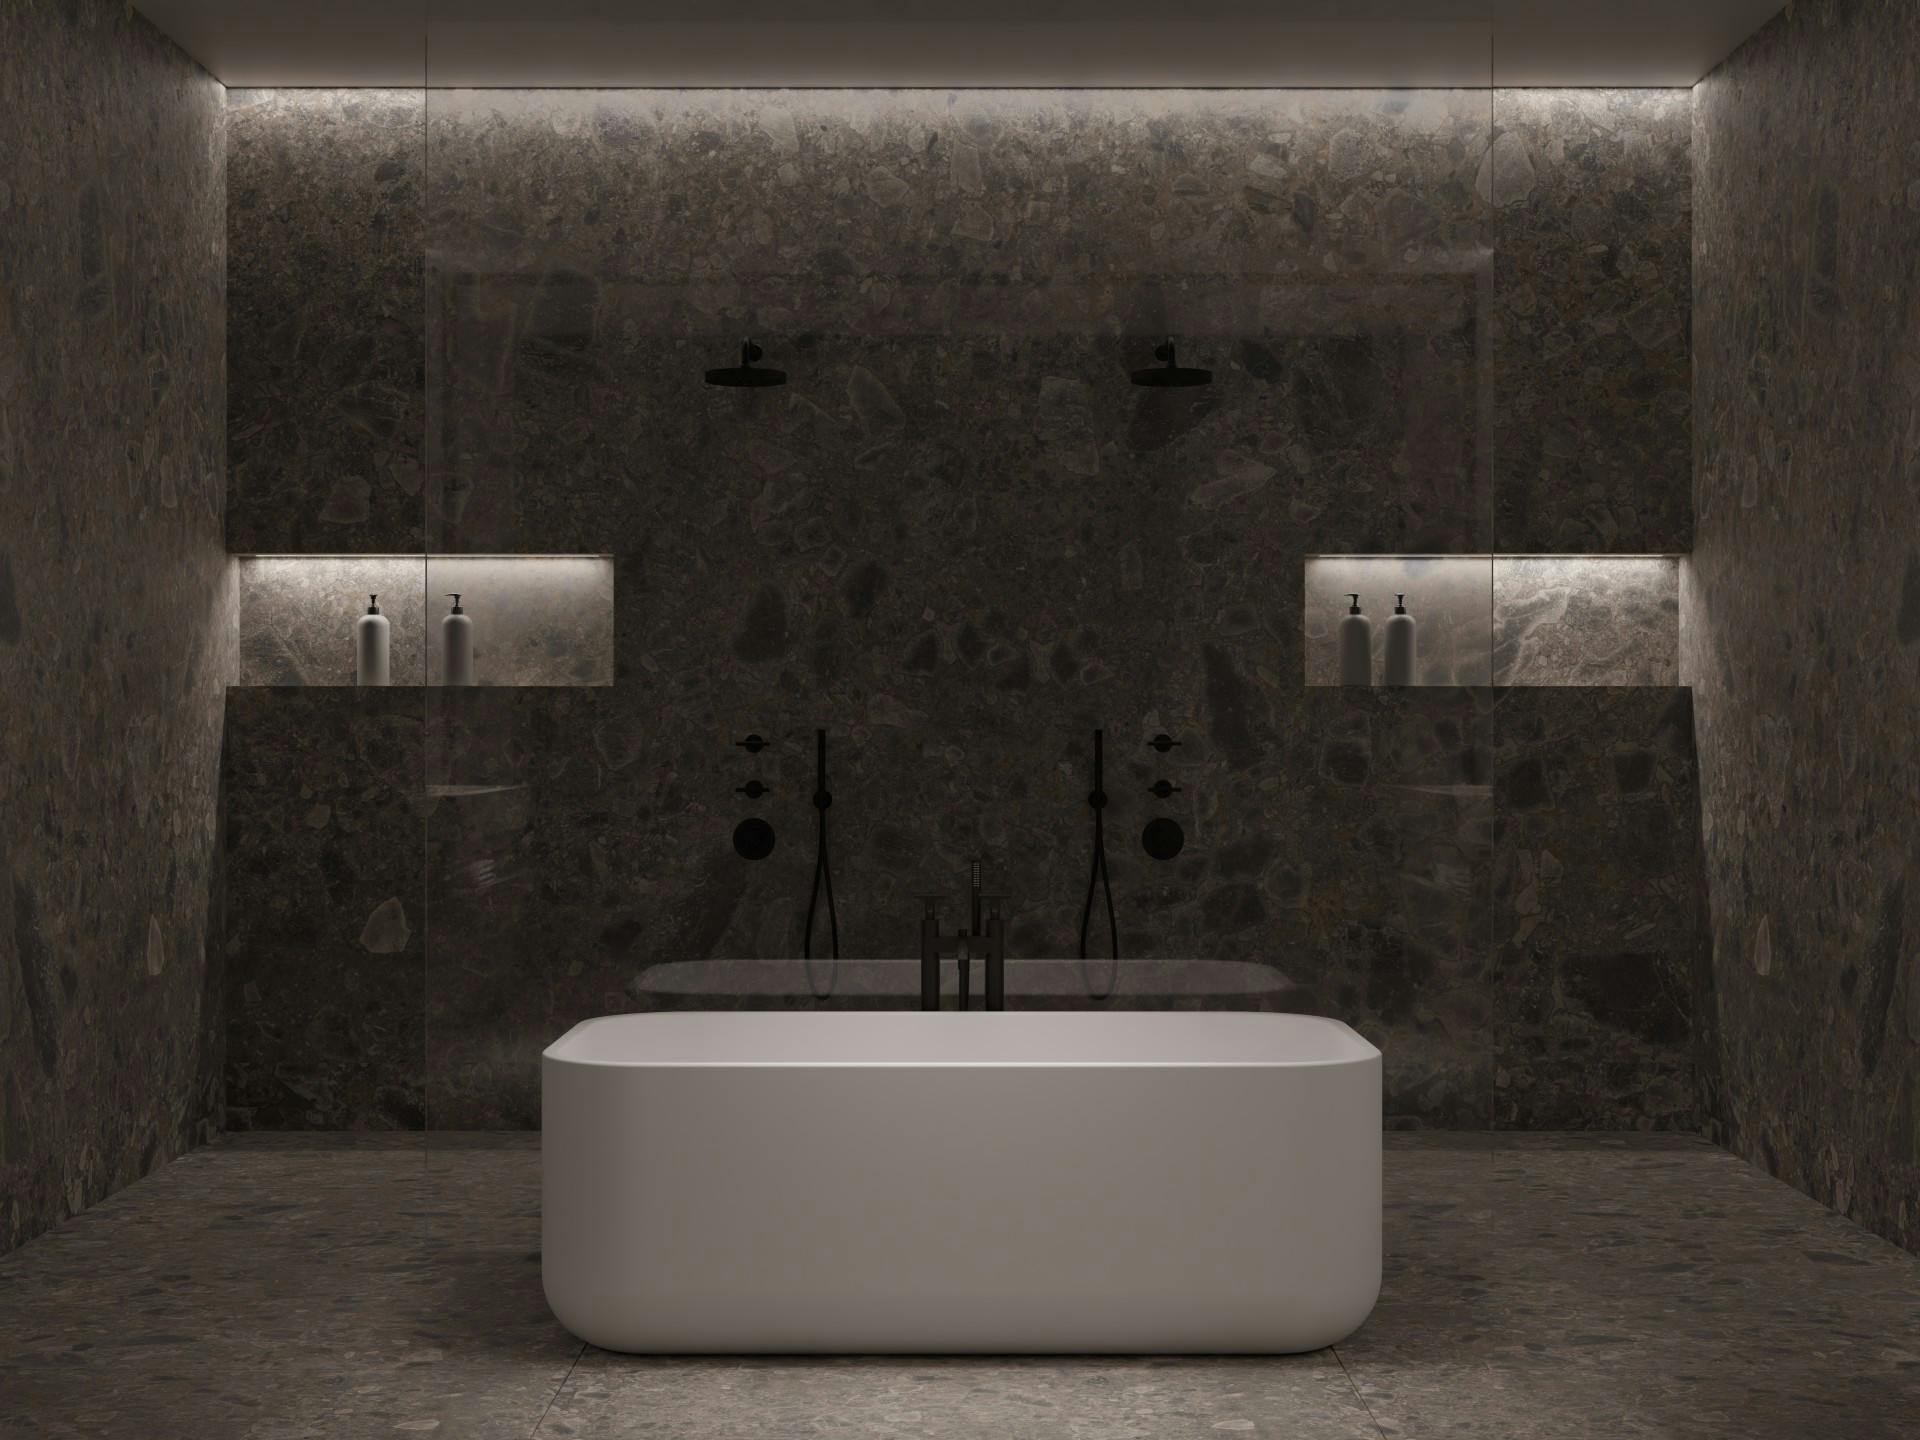 Numéro d'image 44 de la section actuelle de The refurbishment of its bathrooms, carried out entirely with DKTN, brings this Irish hotel closer to achieving one more star de Cosentino France